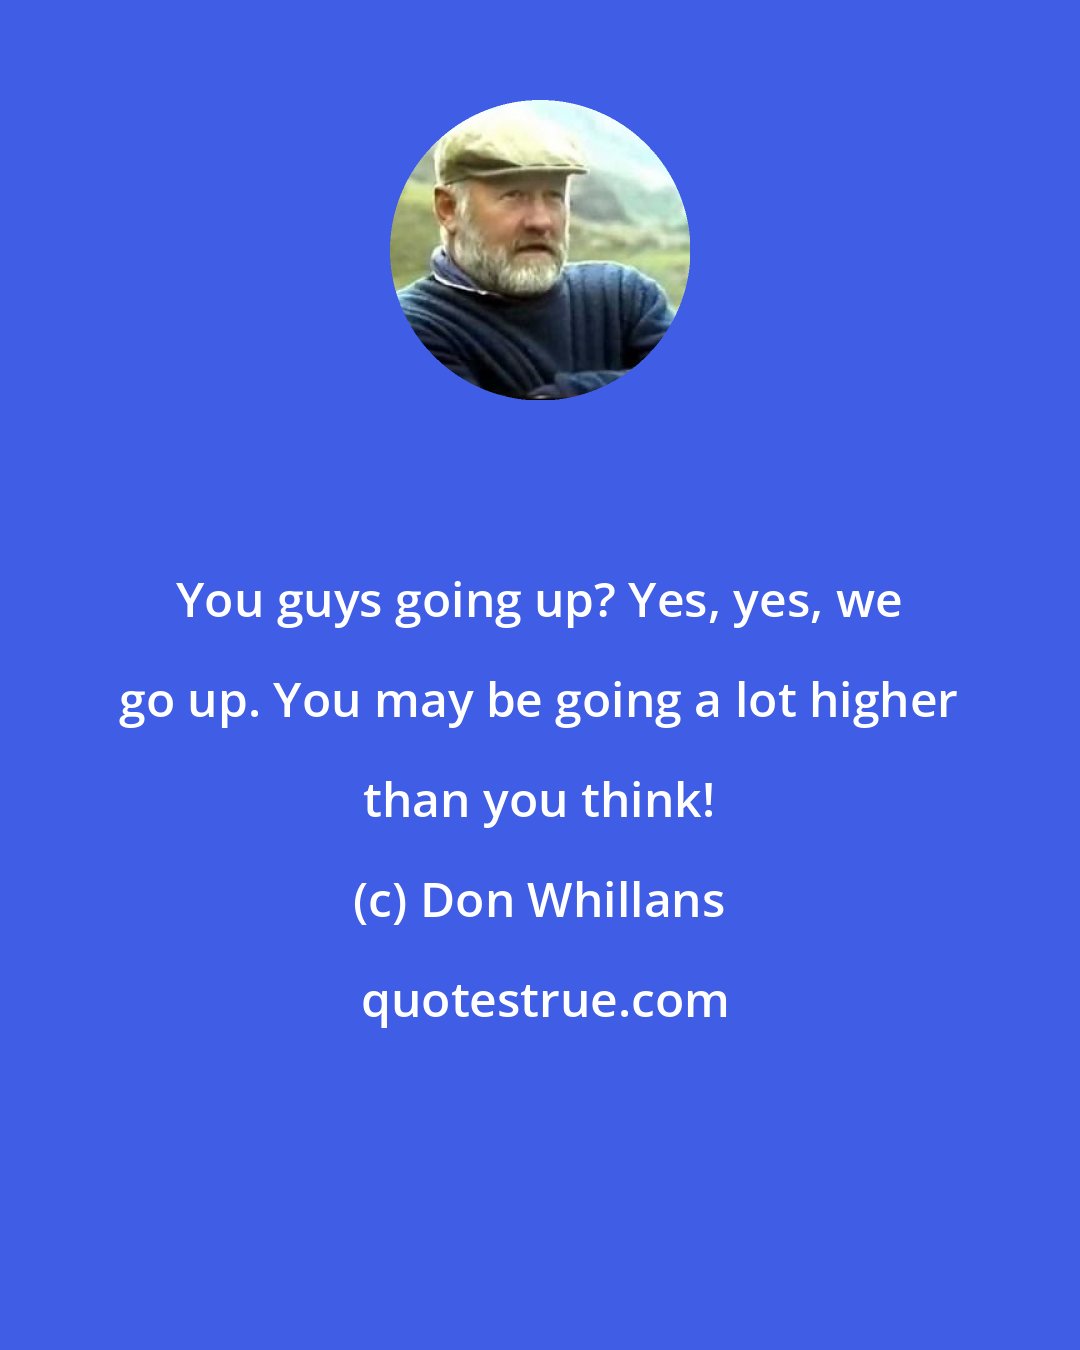 Don Whillans: You guys going up? Yes, yes, we go up. You may be going a lot higher than you think!